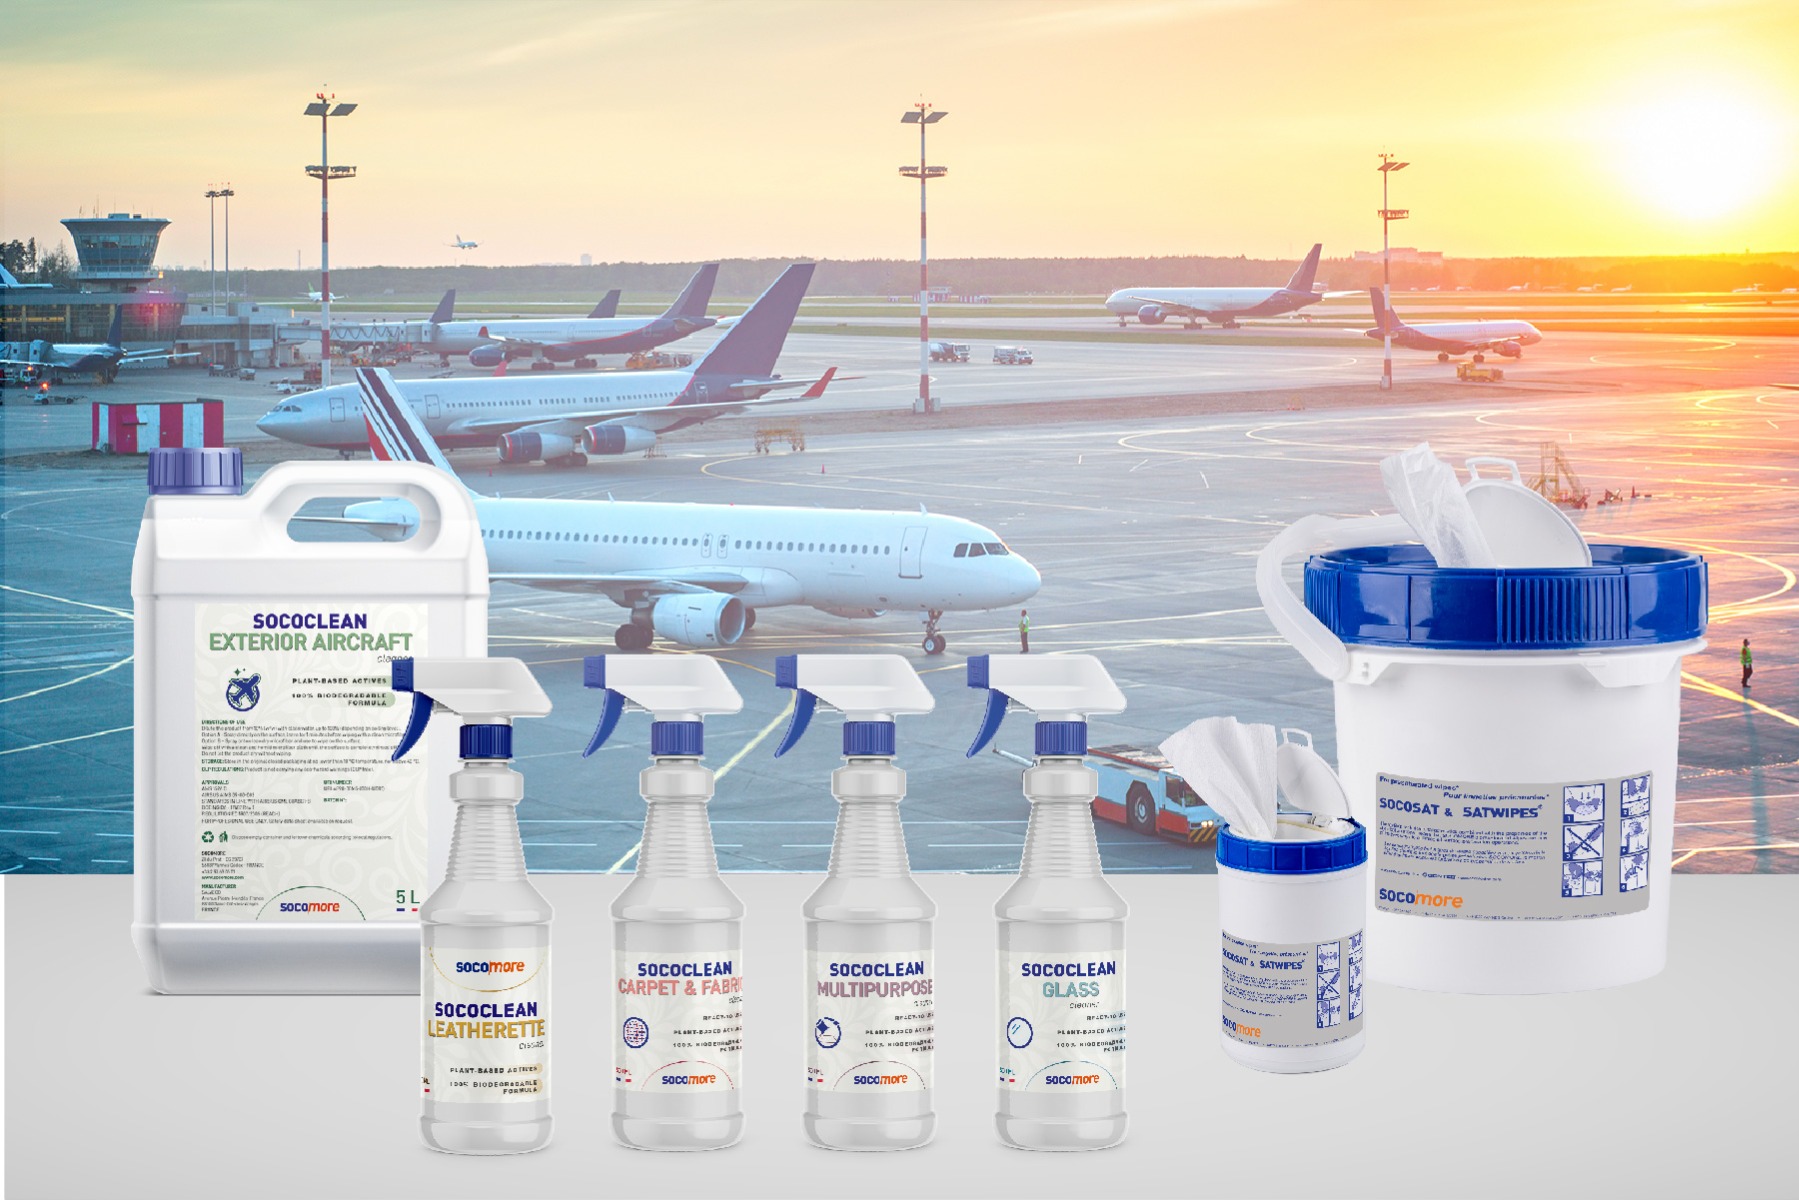 100% plant-based interior and exteriror cleaners for aircrafts during in line maintenance